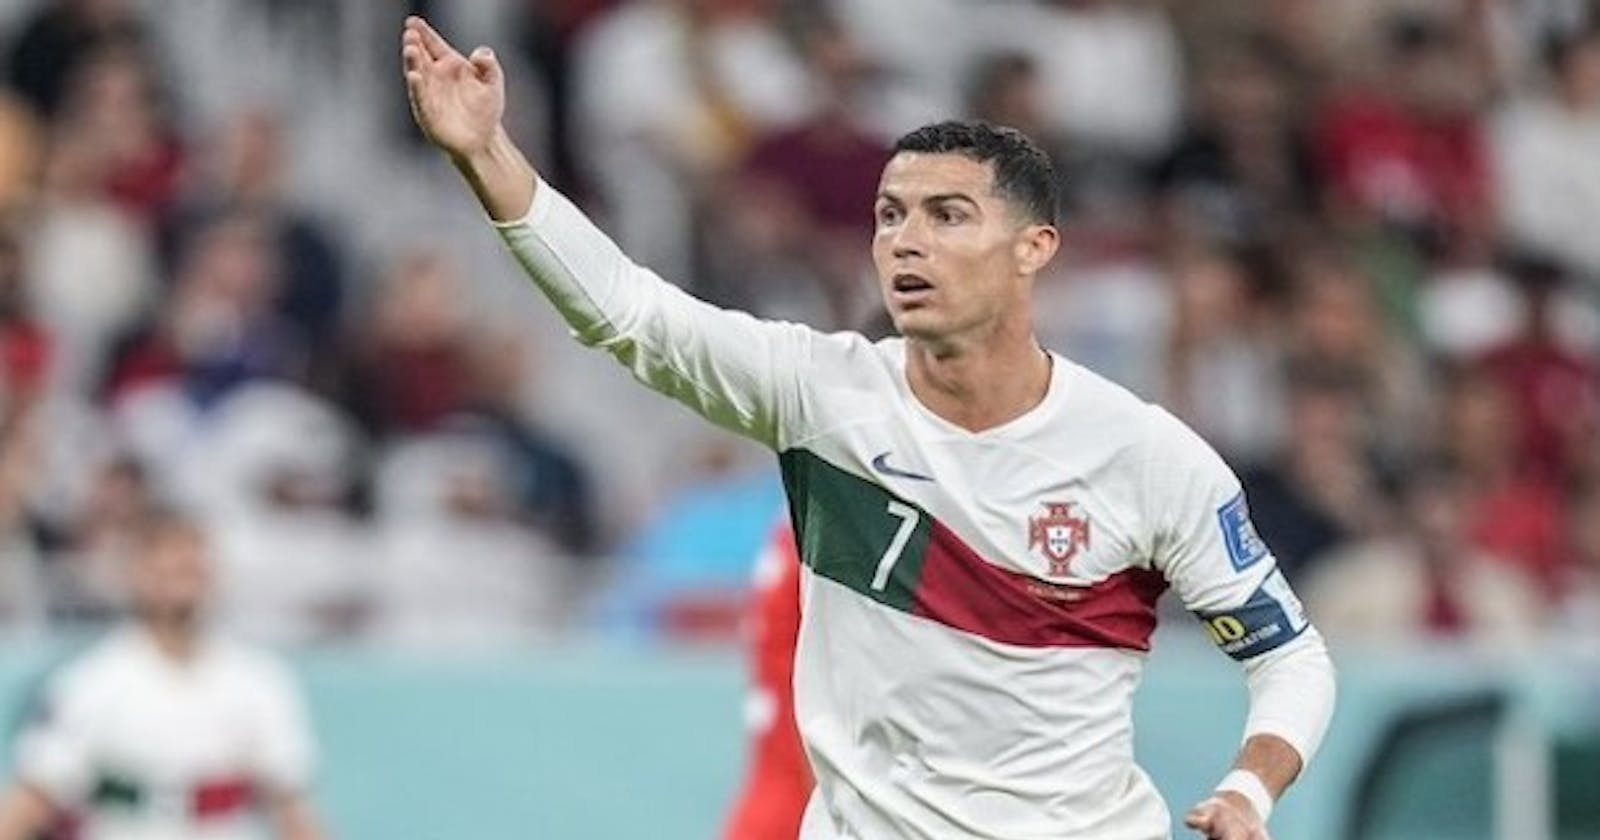 After the 2022 World Cup, Ronaldo has no plans to retire from the Portuguese national team